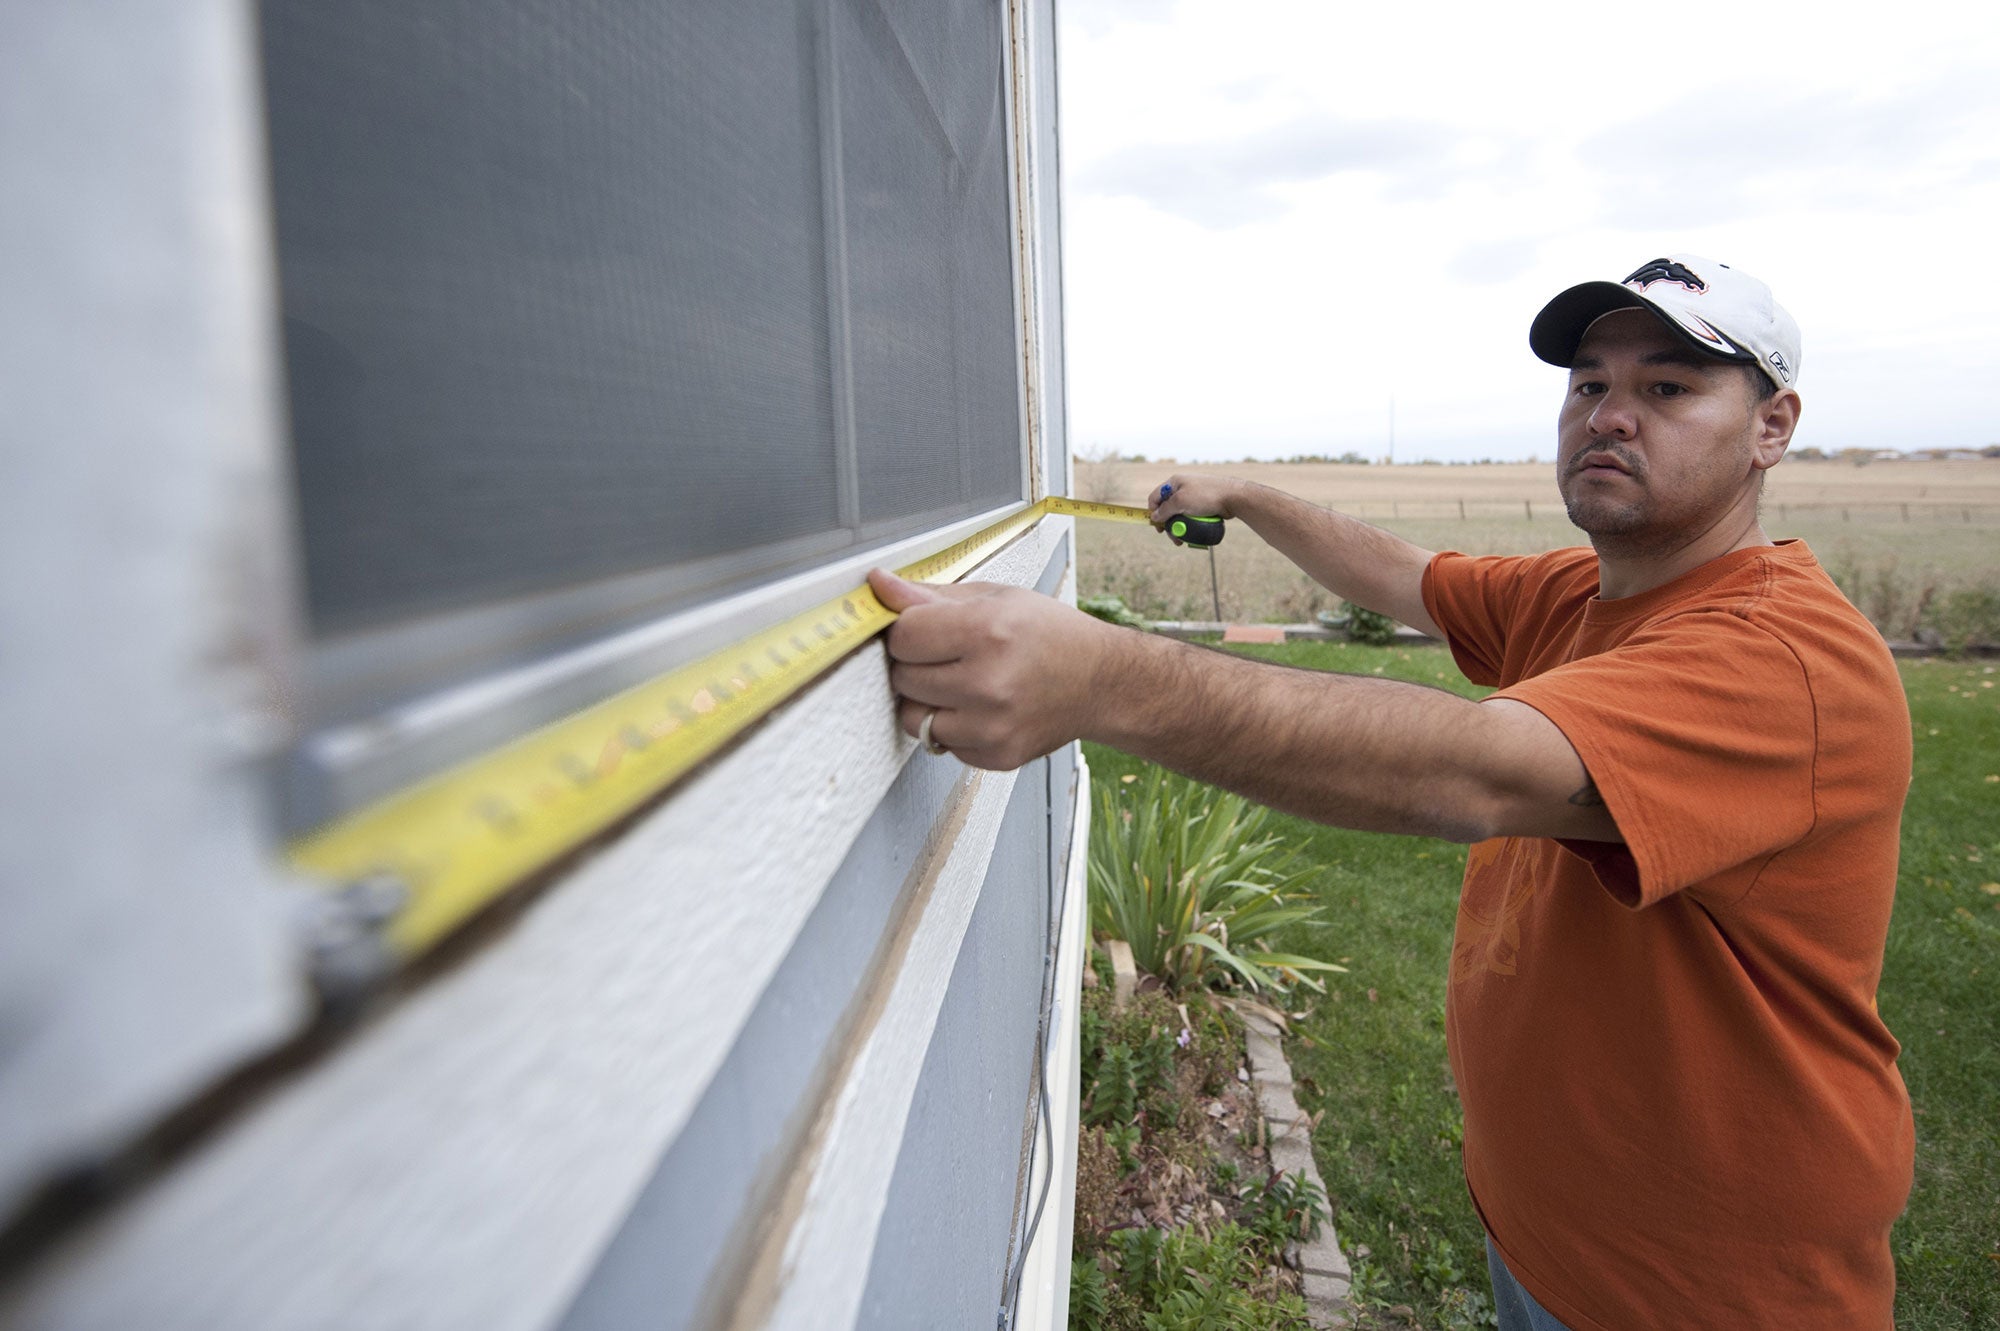 A homeowner stretches out measuring tape along the bottom of a window frame outside of their home.